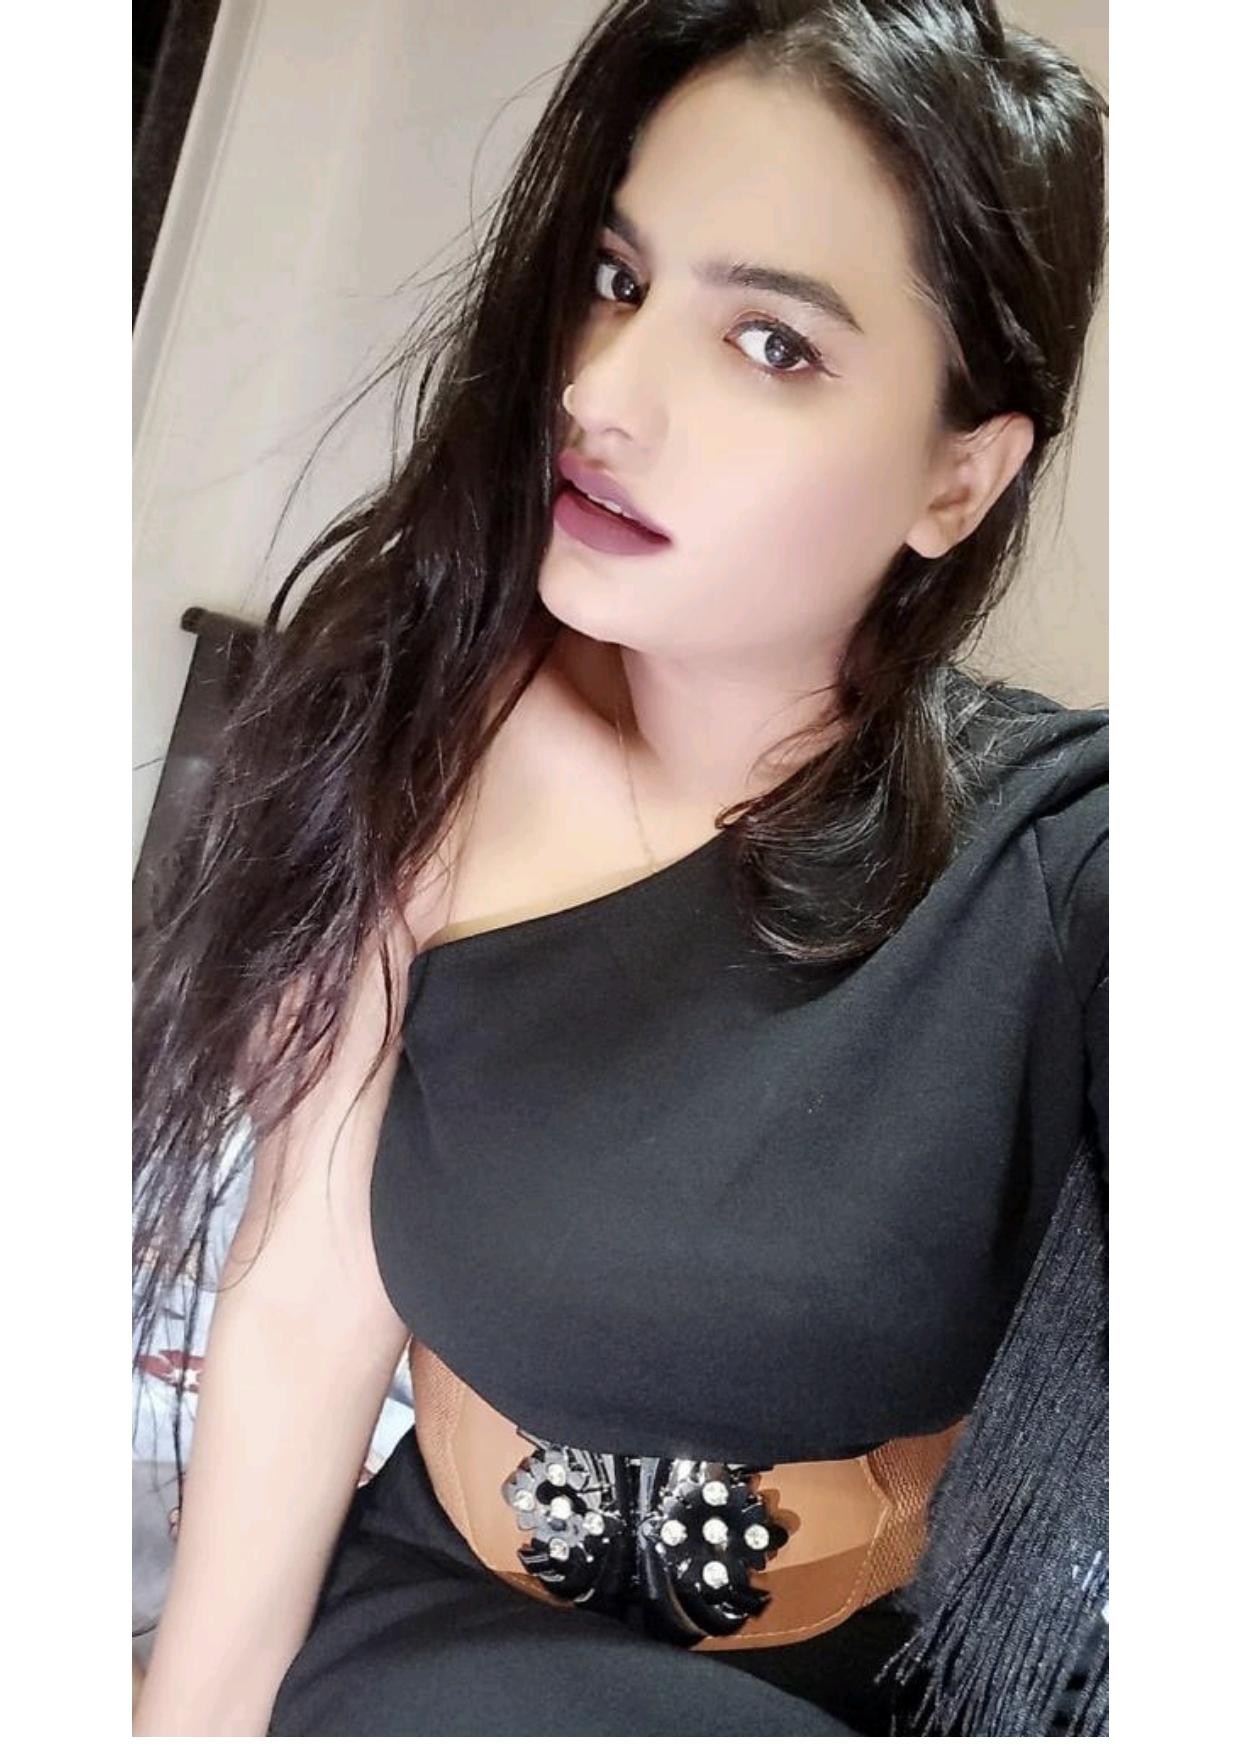 High profile Surat call girls available 24/7